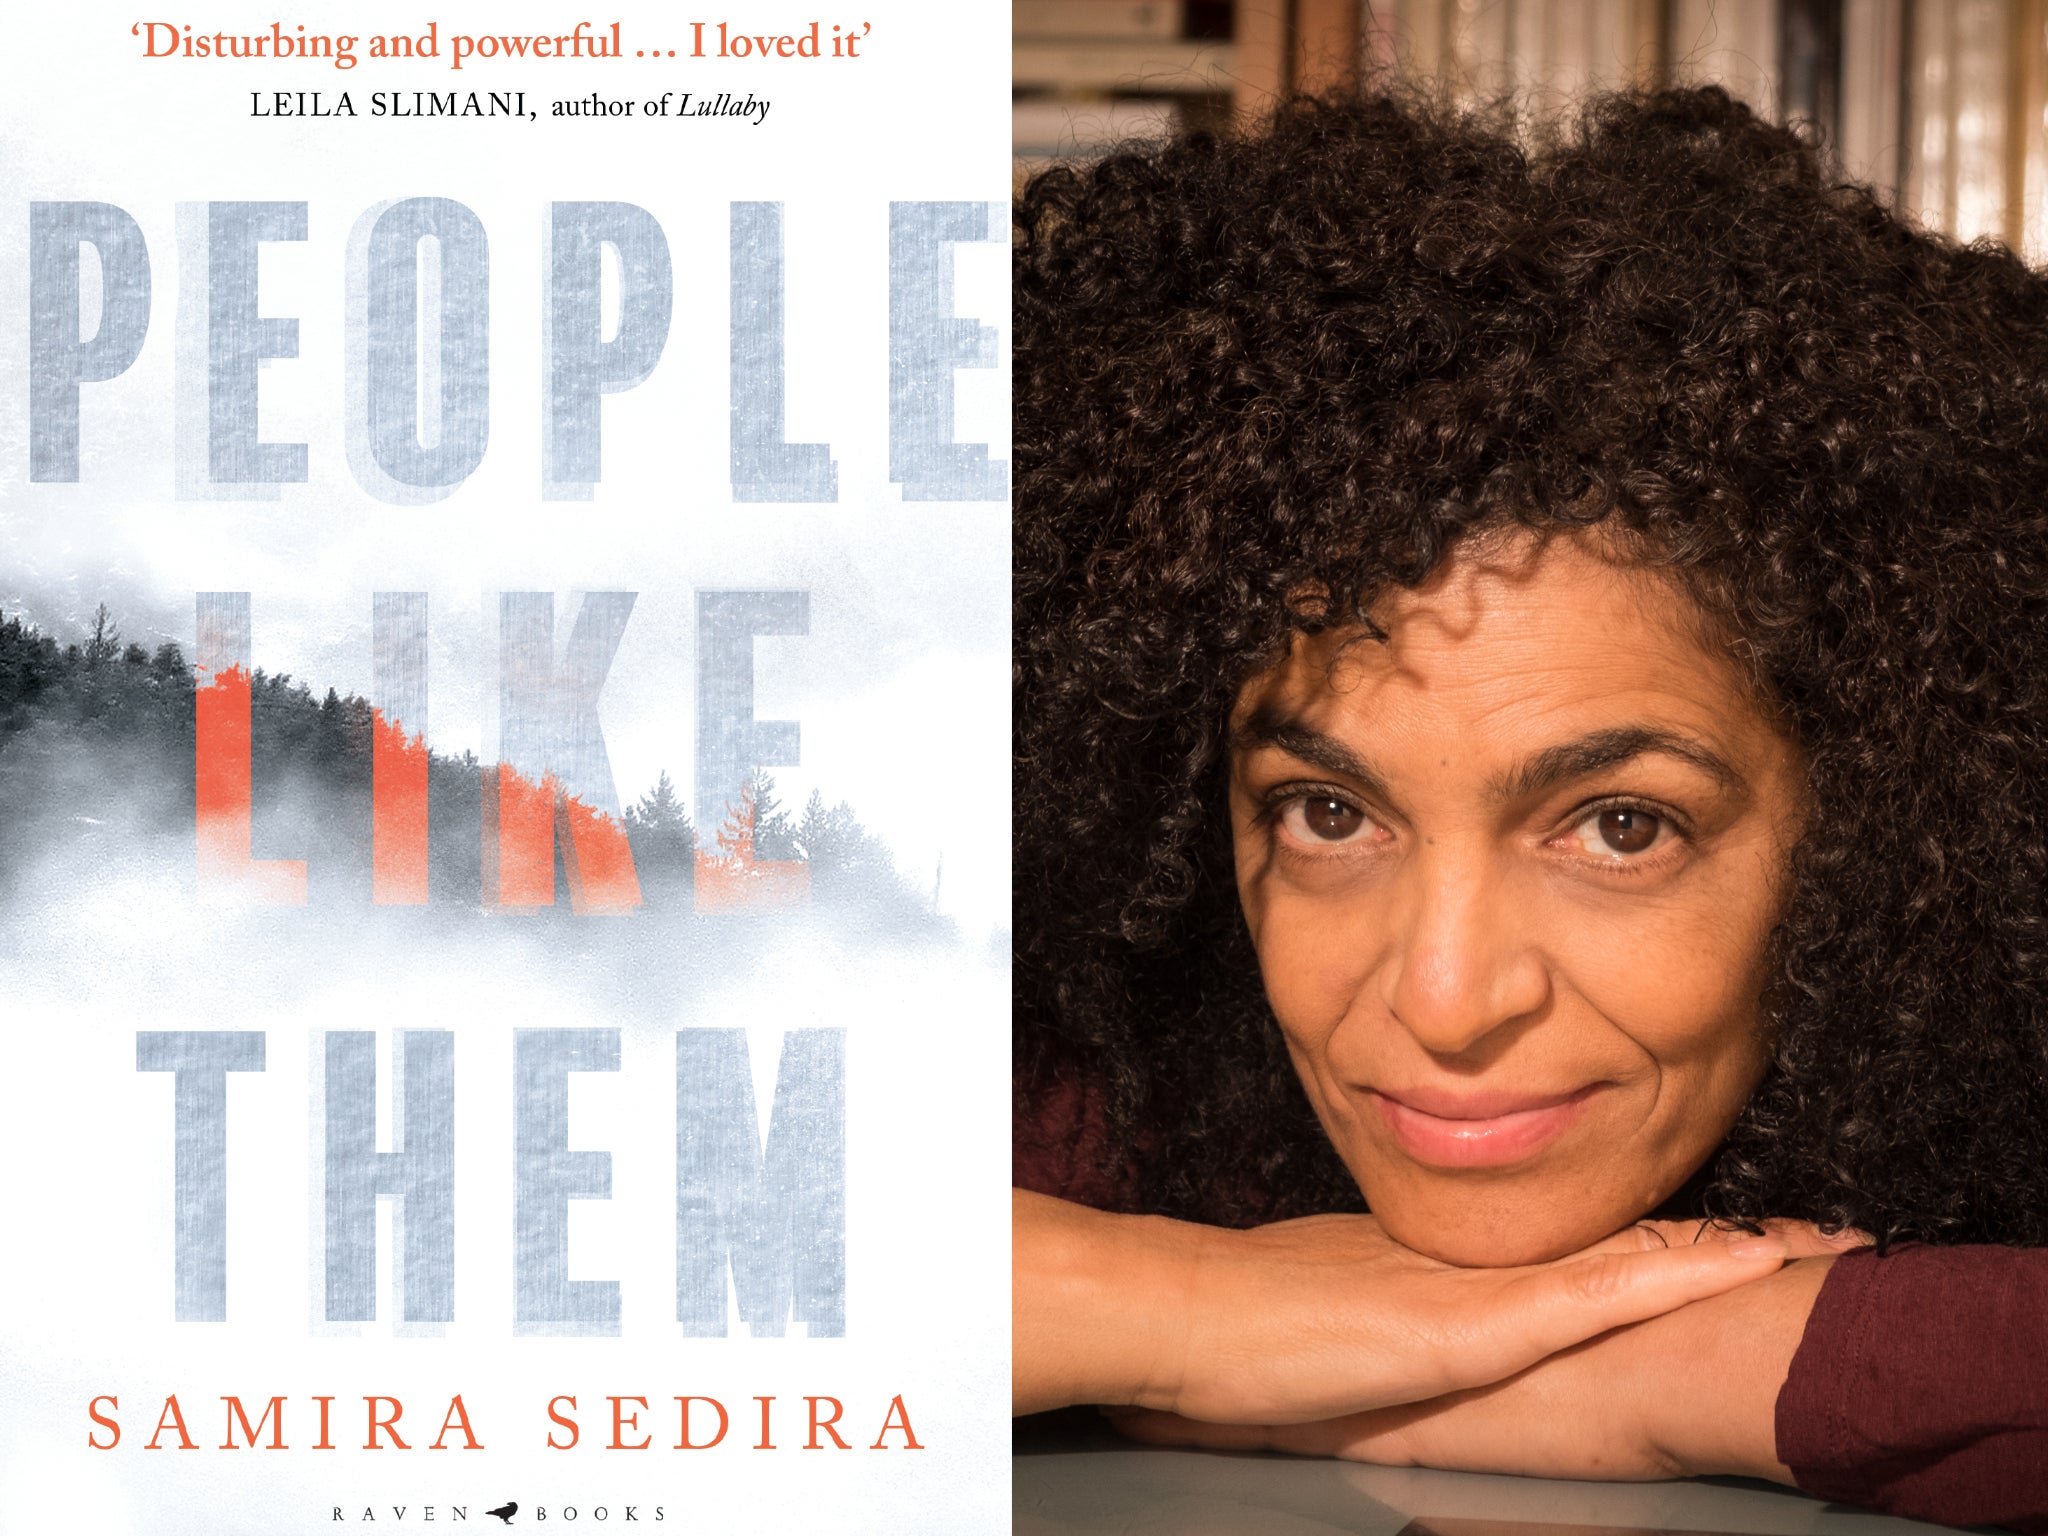 Samira Sedira’s novel ‘People Like Them’ is inspired by one of France’s most sensational murder cases of modern times